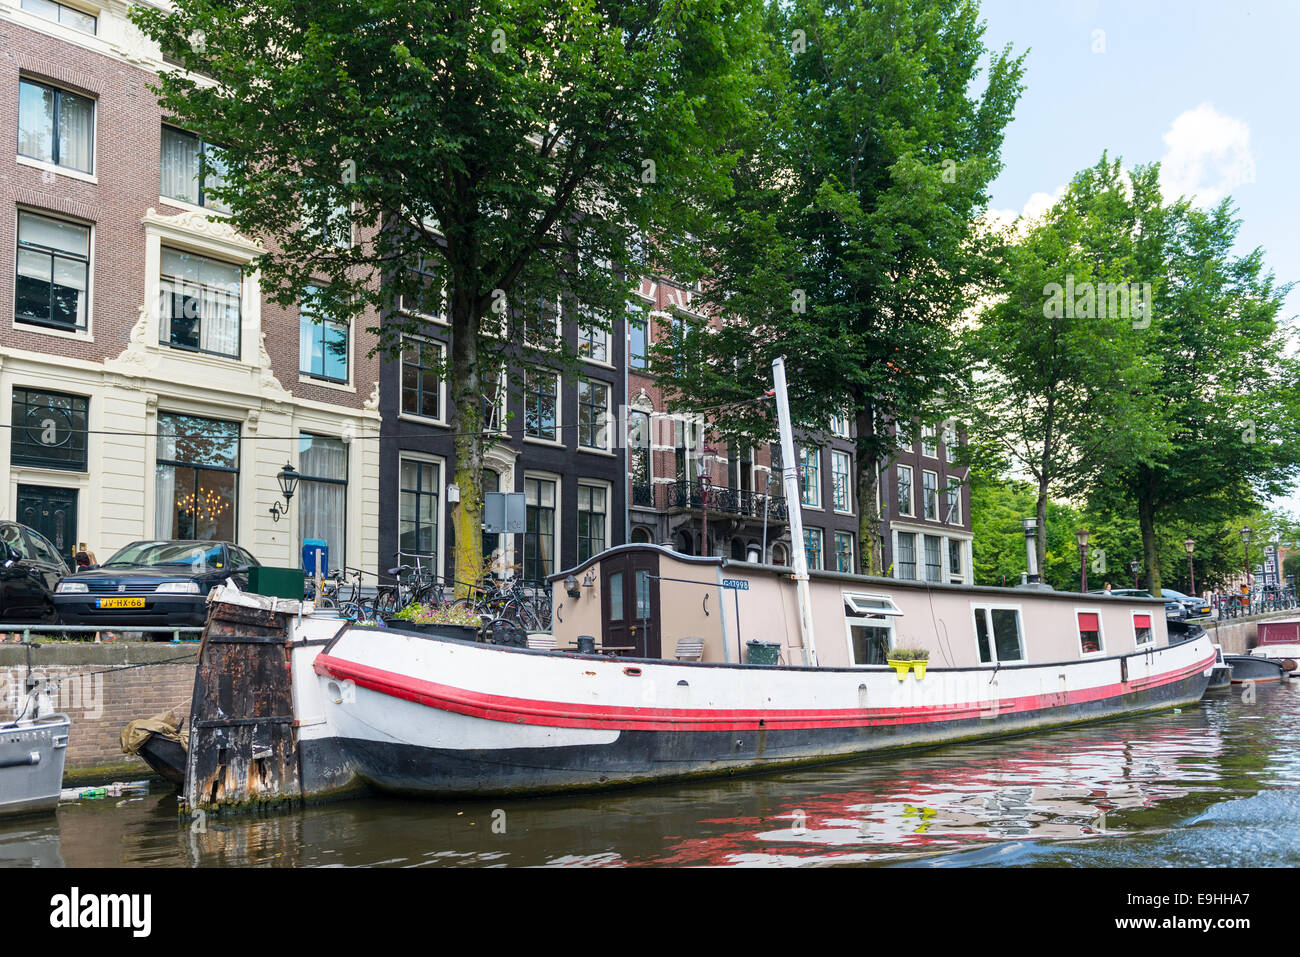 Houseboat at the bank of a canal with trees, Amsterdam, Netherlands Stock Photo